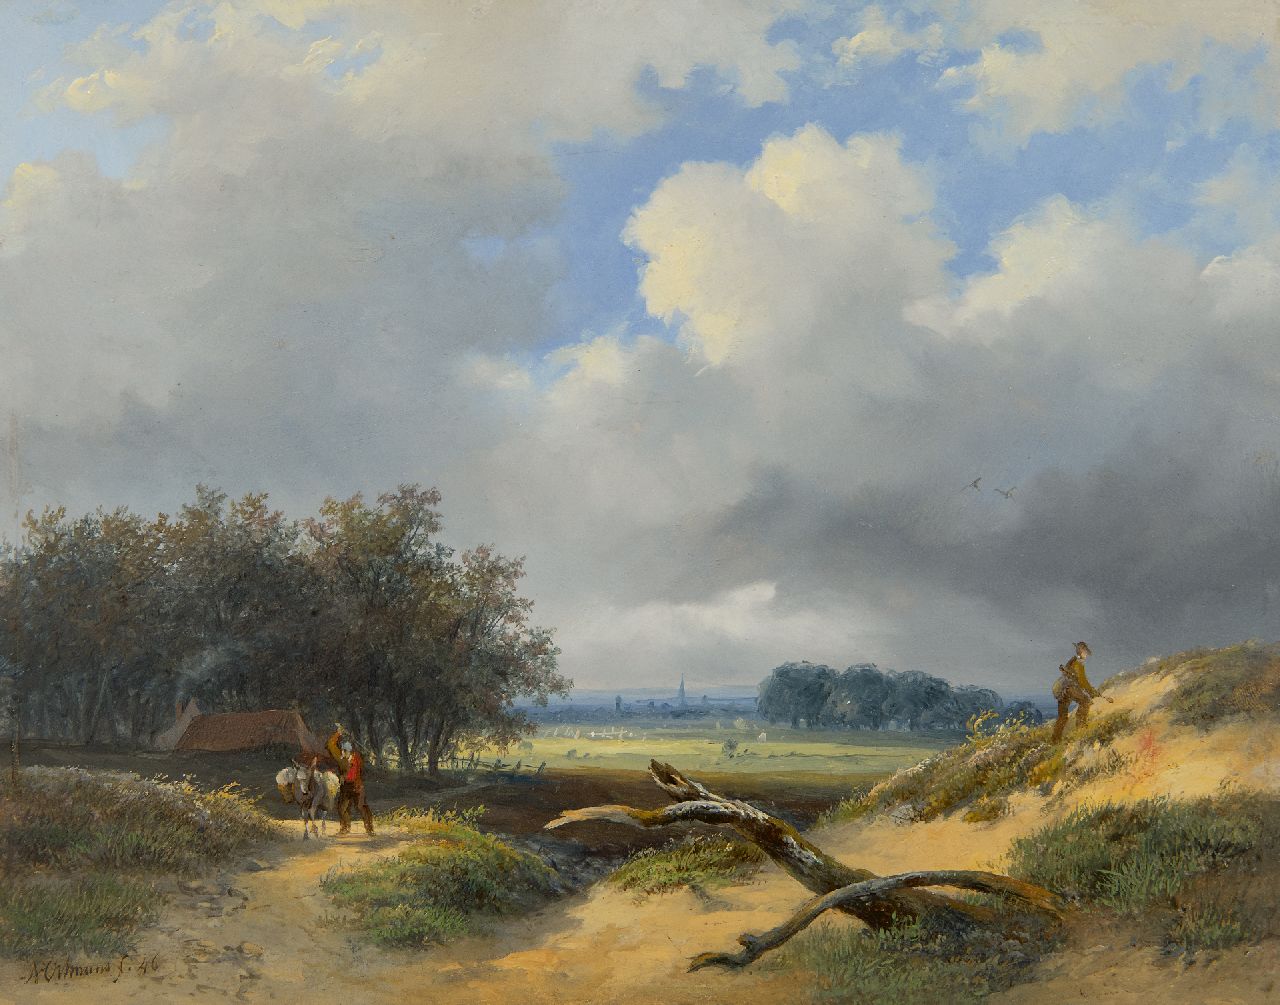 Ortmans F.A.  | François Auguste Ortmans | Paintings offered for sale | Valley landscape with hunter and farmer, oil on panel 23.4 x 29.4 cm, signed l.l. and dated '46